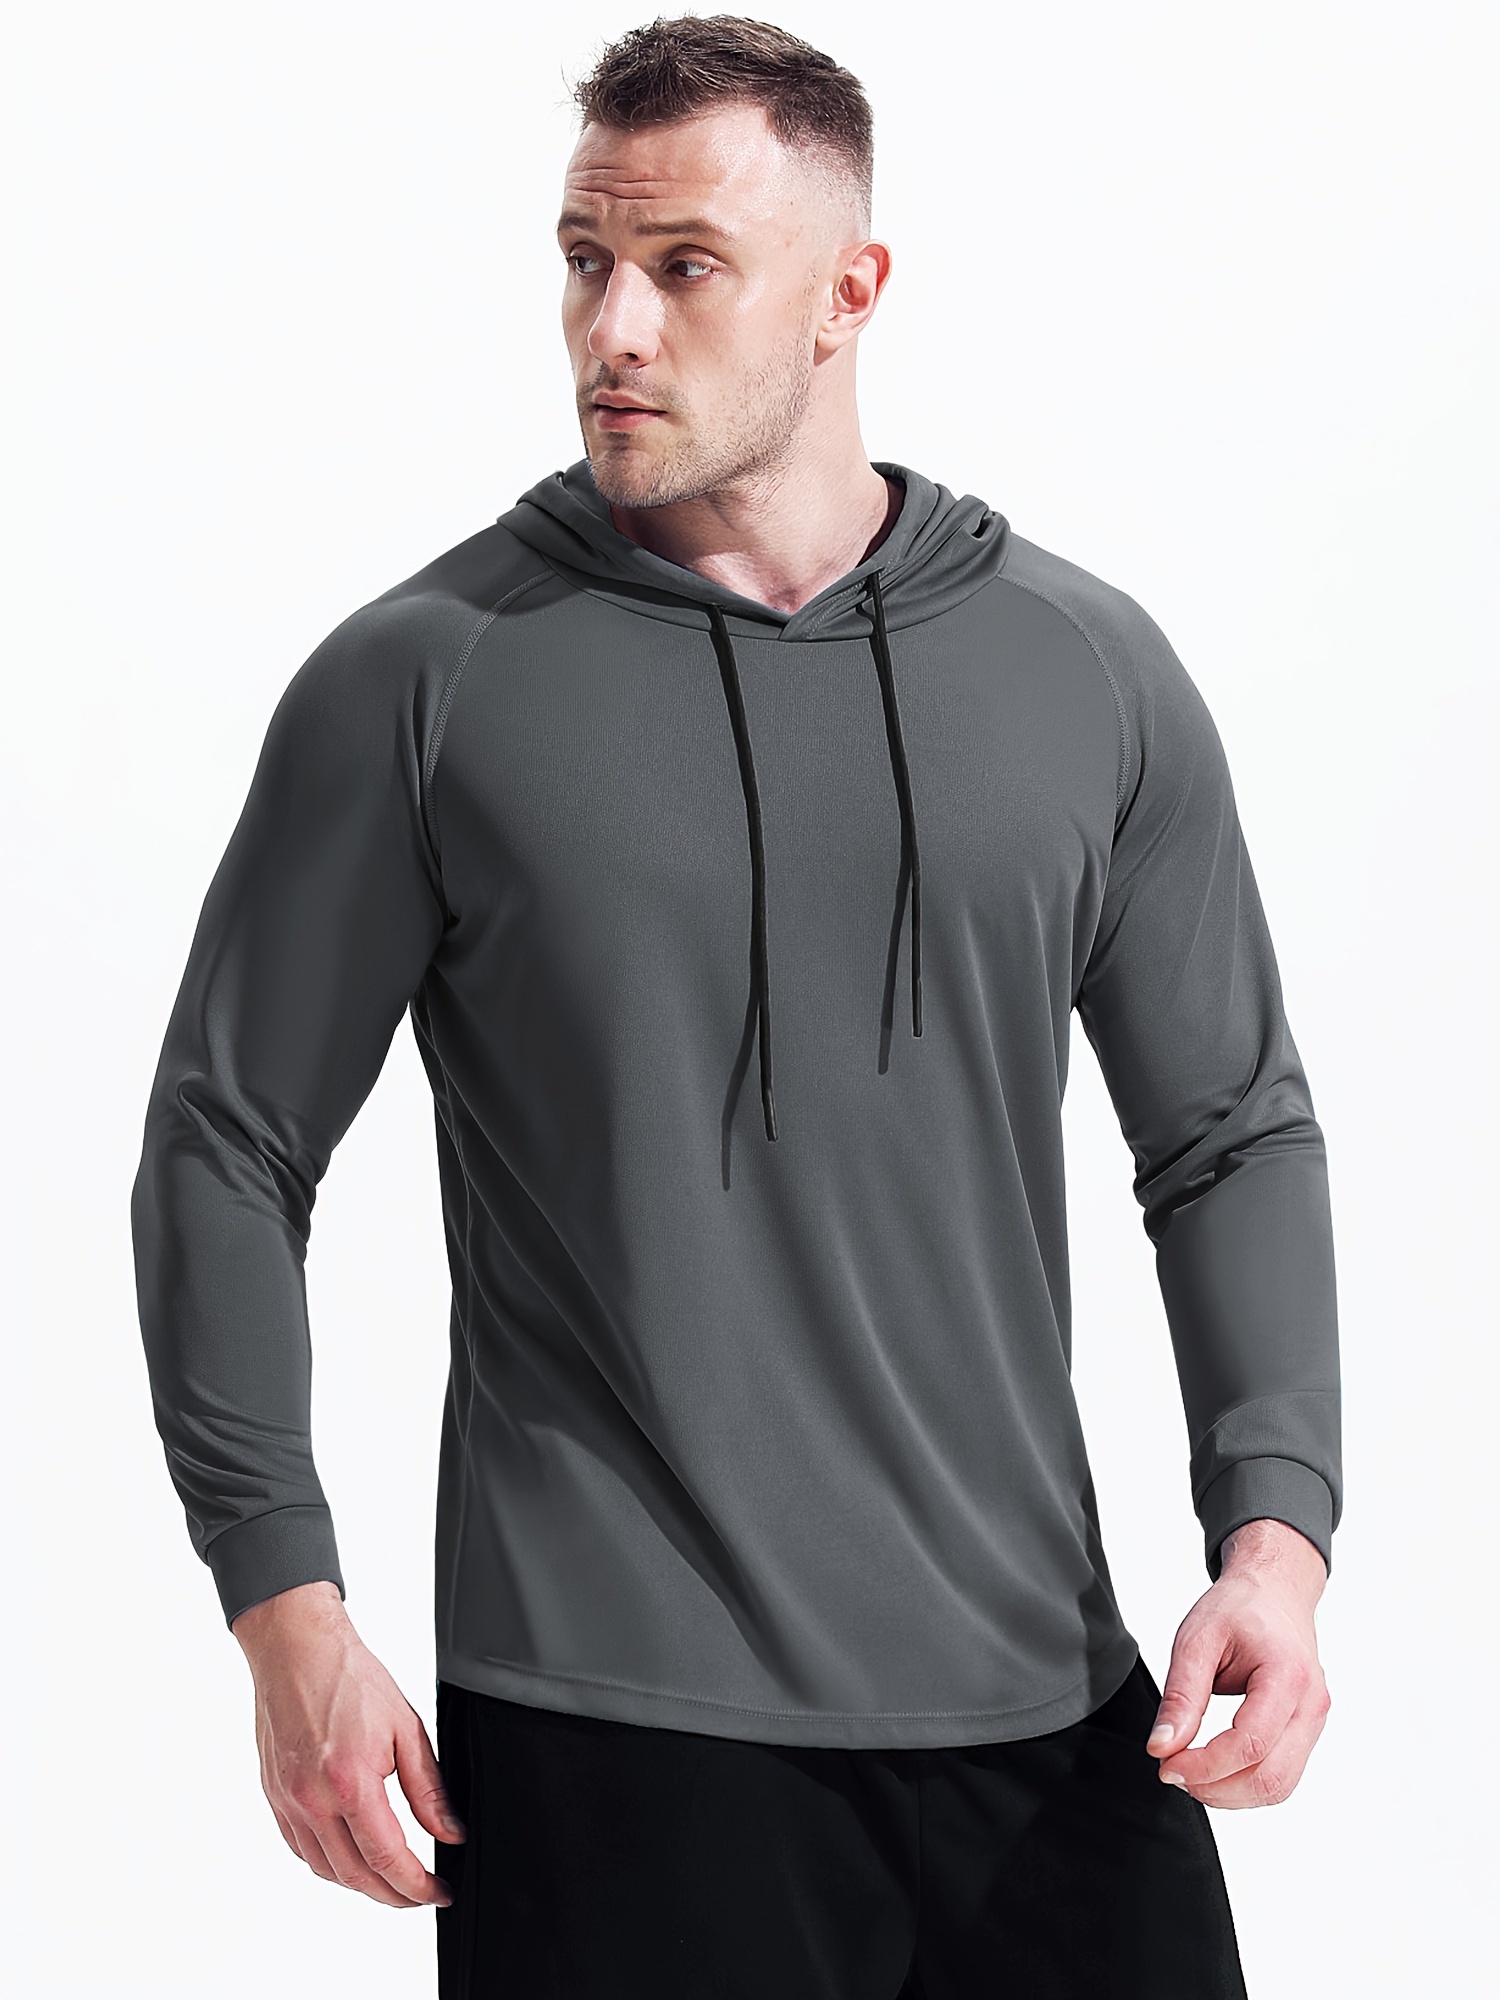 Mens Zip Up Hoodie Muscle Fit T Shirts Jacket For Gym, Running, And  Training Long Sleeve Sports Clothing With Hooded Sweatshirt 221202 From  Luo03, $19.35